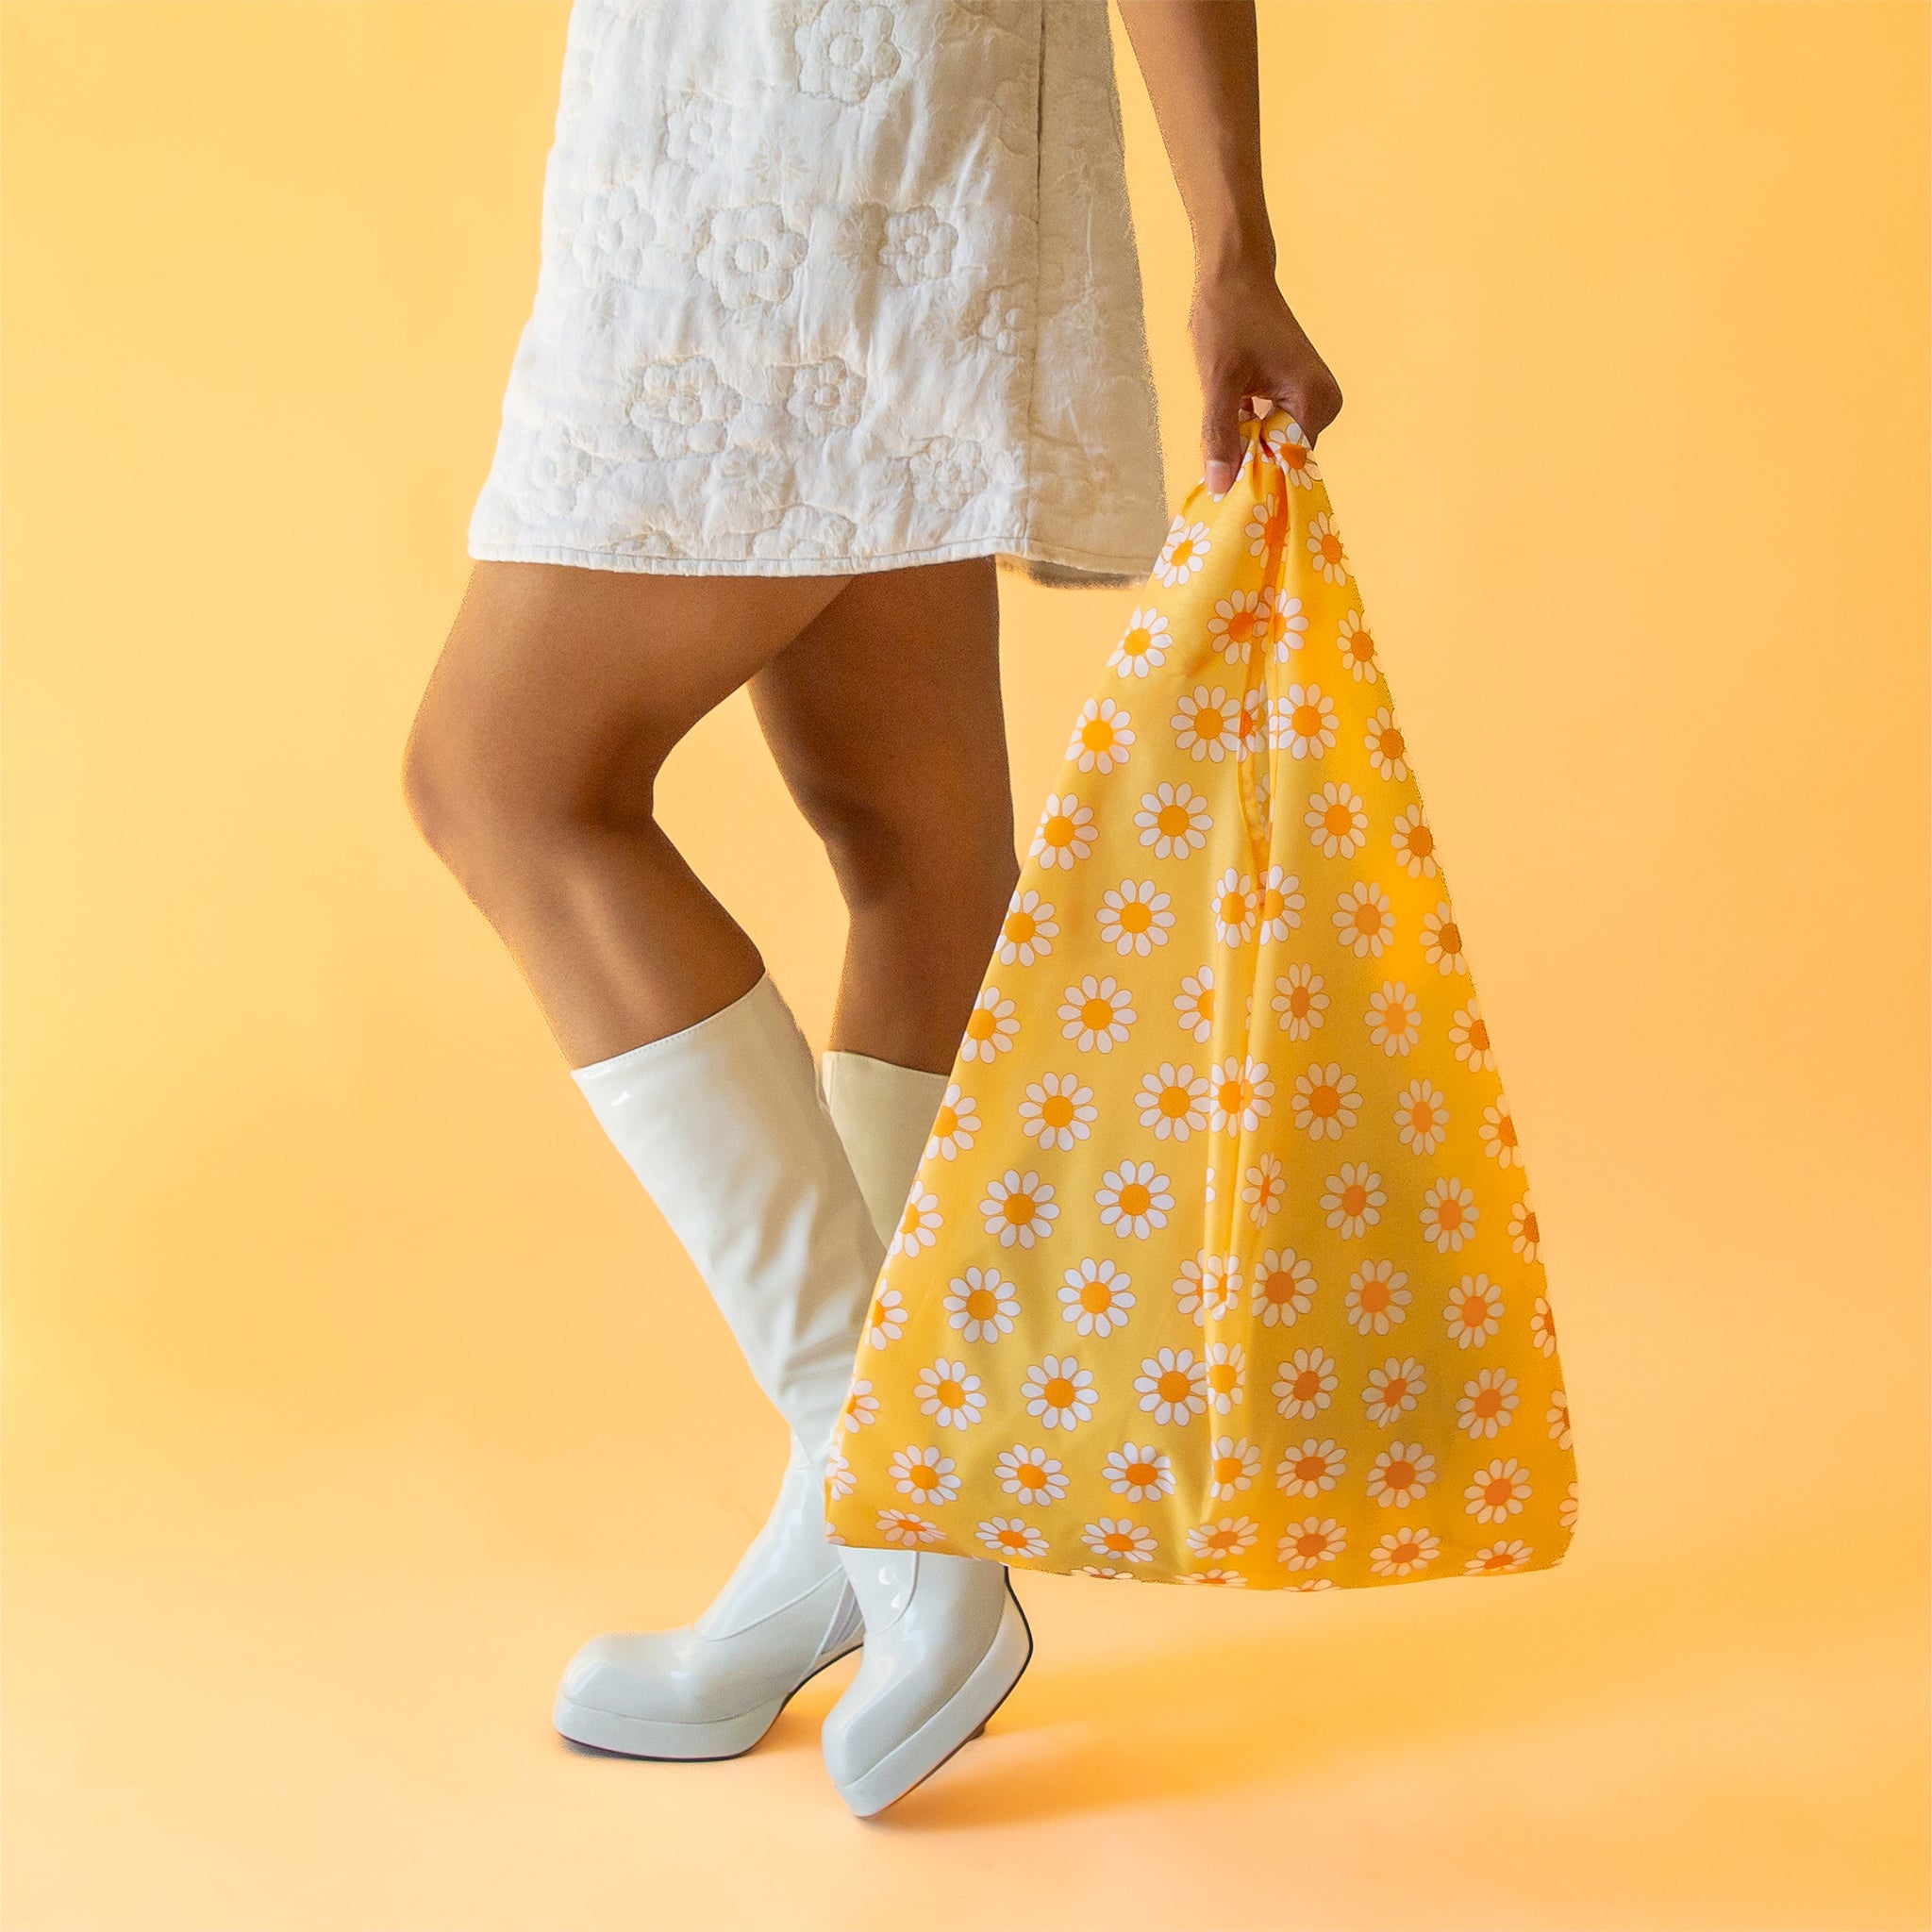 On a yellow background is a yellow, orange and white daisy pattern nylon bag.